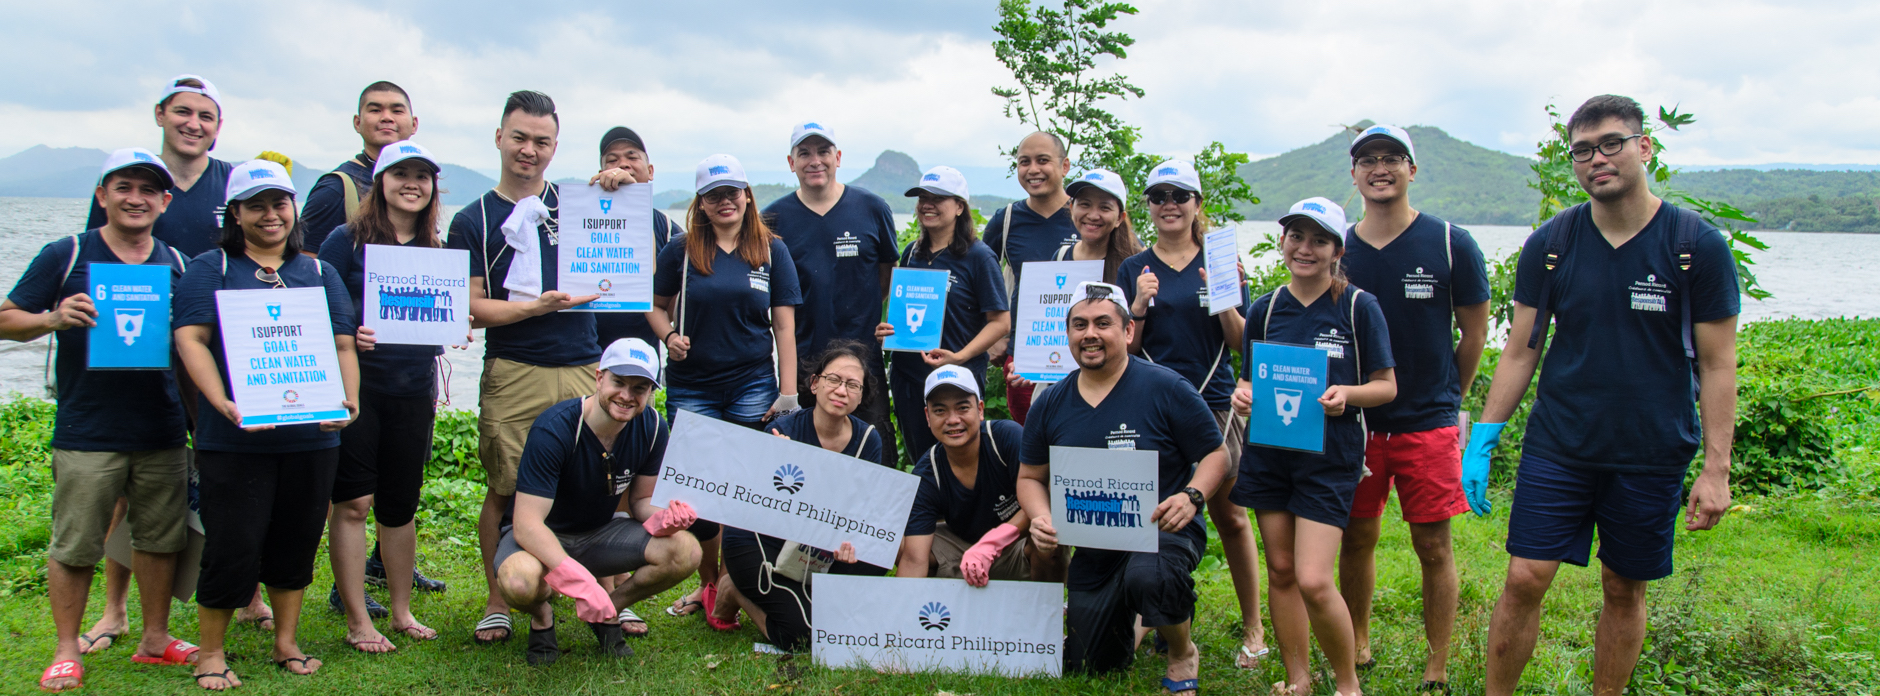 Pernod Ricard Philippines conducts Responsib’All day in Taal Lake, Batangas